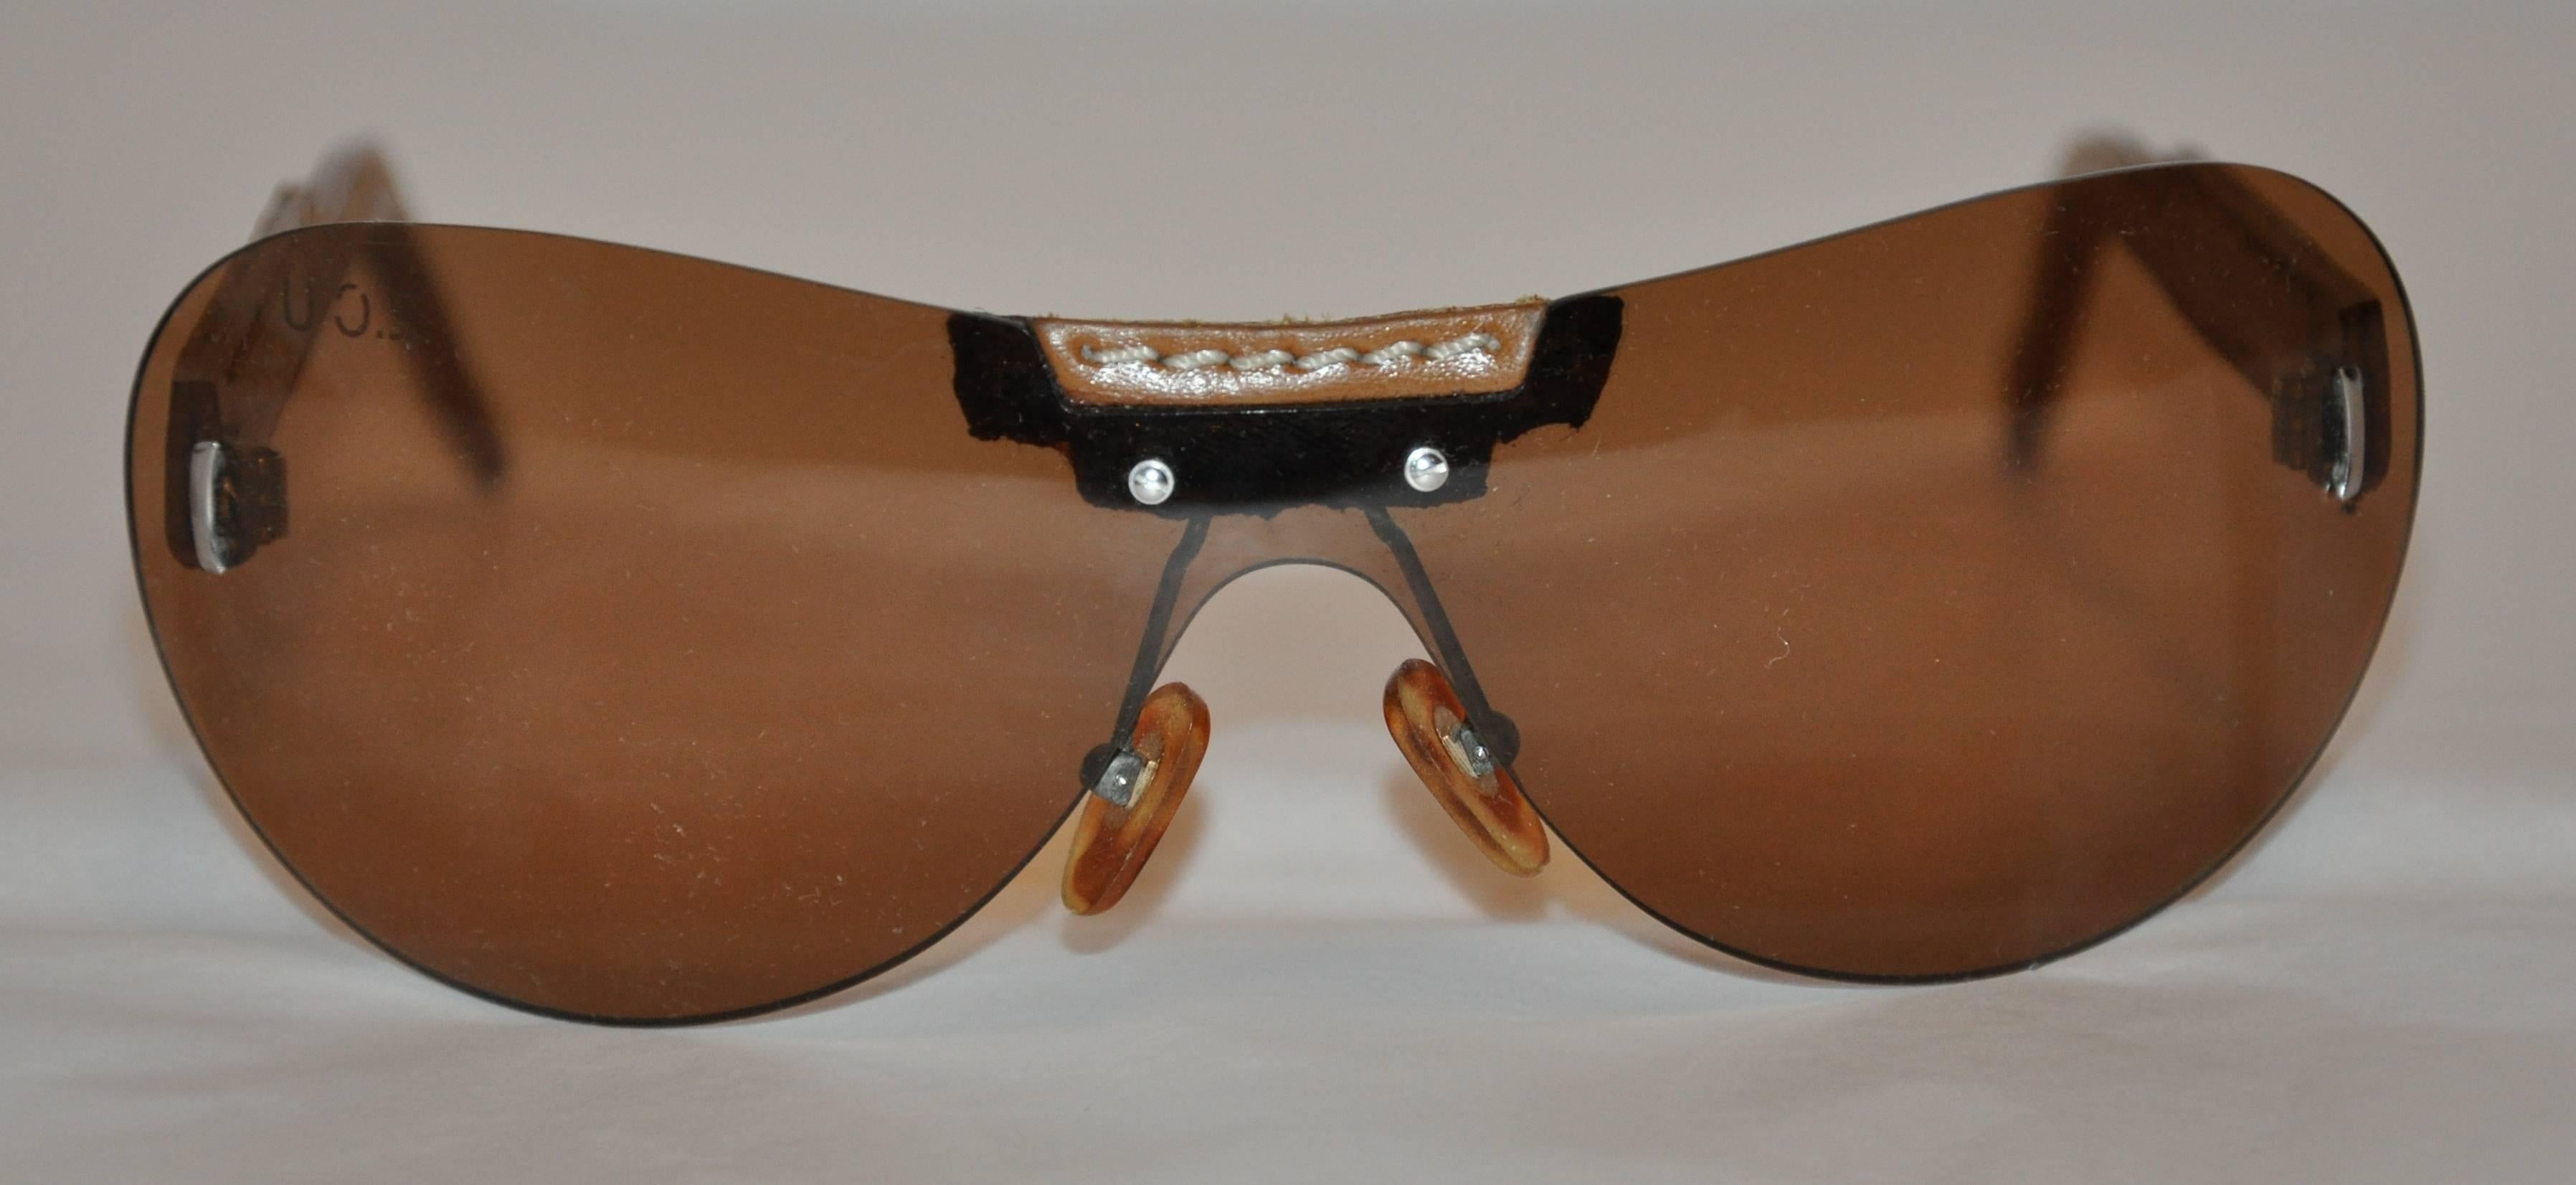           Louis Vuitton sunglasses are detailed with hand-stitched tan leather arms. The front measures 5 5/8